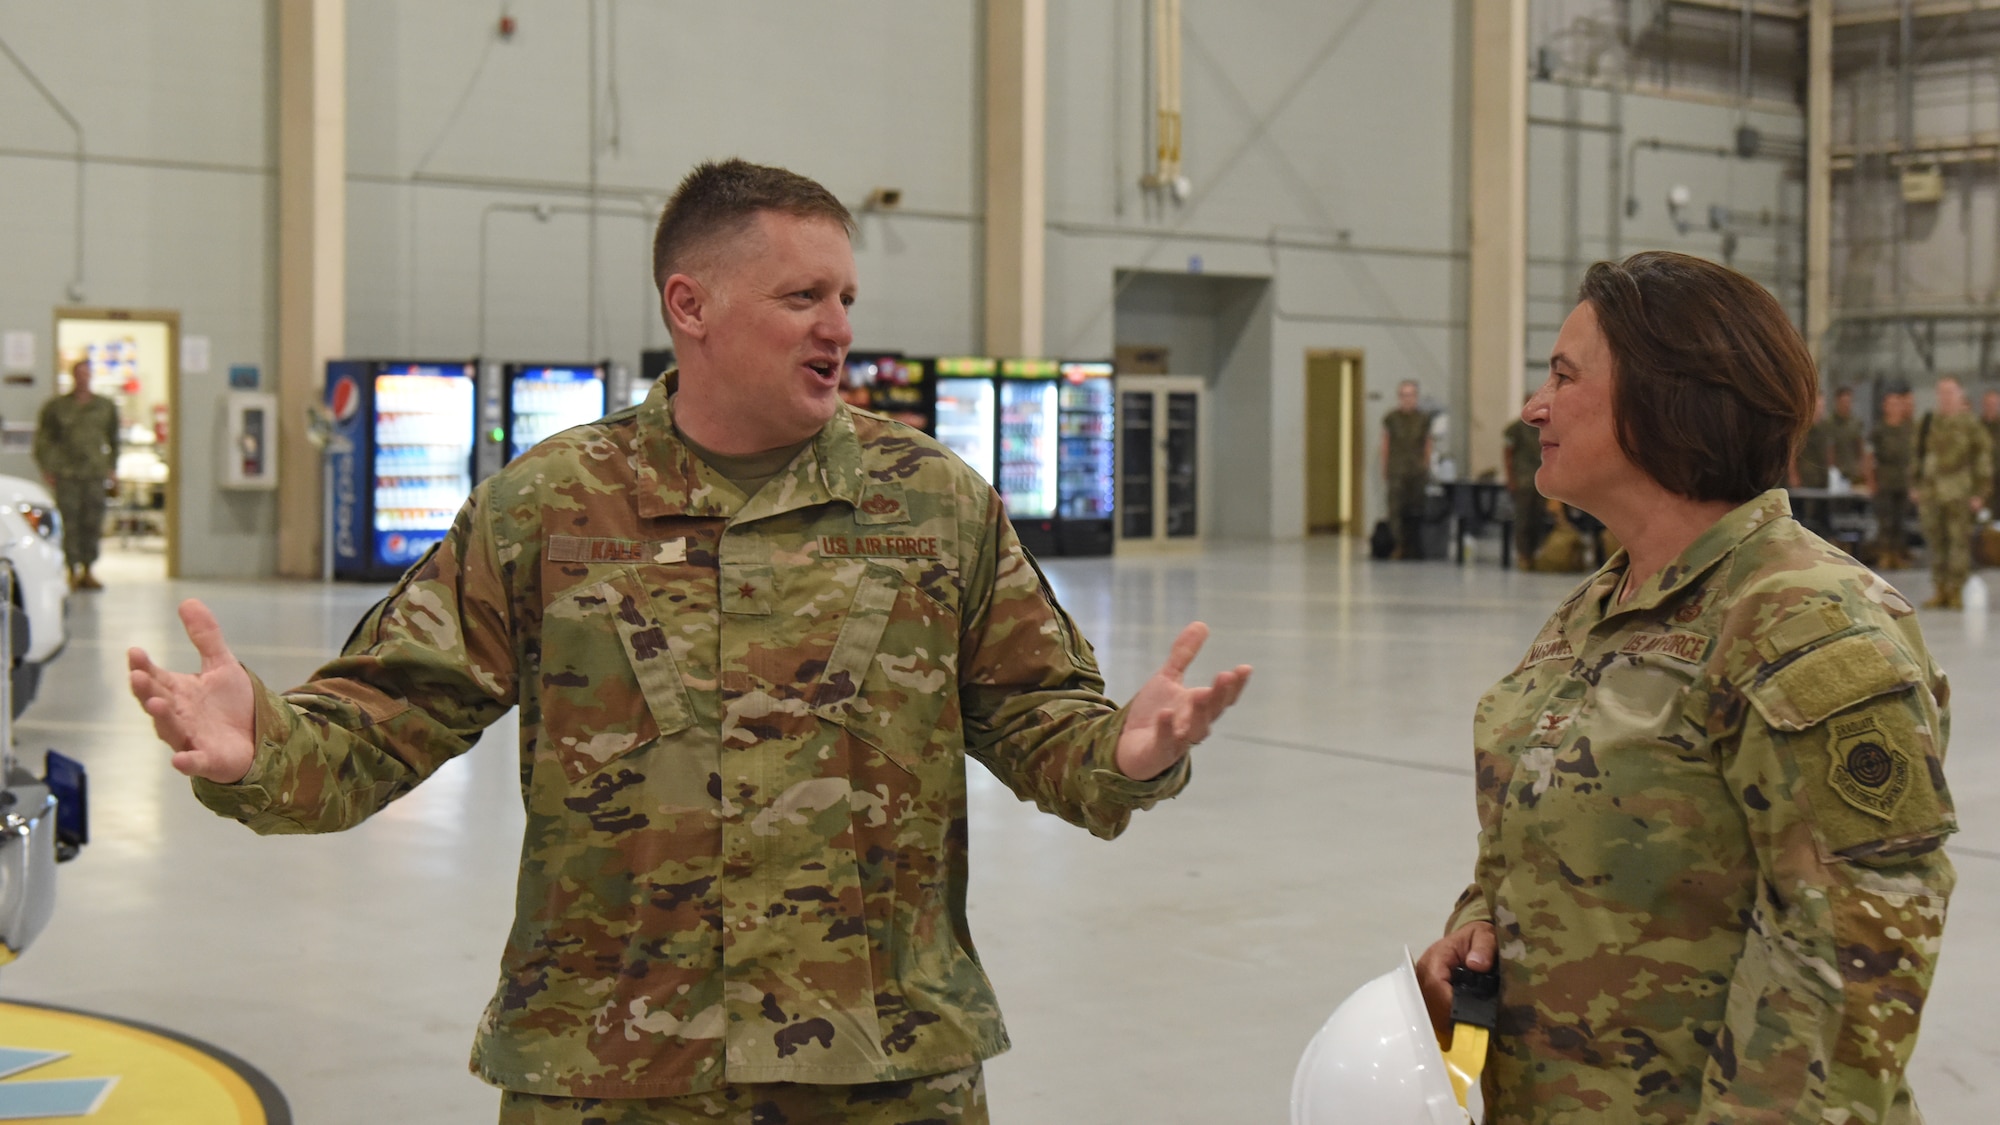 U.S. Air Force Brig. Gen. William Kale III, Air Force Director of Civil Engineers, talks with Col. Angelina Maguinness, 17th Training Group commander, at Goodfellow Air Force Base, Texas, June 23, 2022. Kale coordinated with Maguinness to see firsthand the training of Air Force firefighters at the Louis F. Garland Department of Defense Fire Academy. (U.S. Air Force photo by Airman 1st Class Zachary Heimbuch)